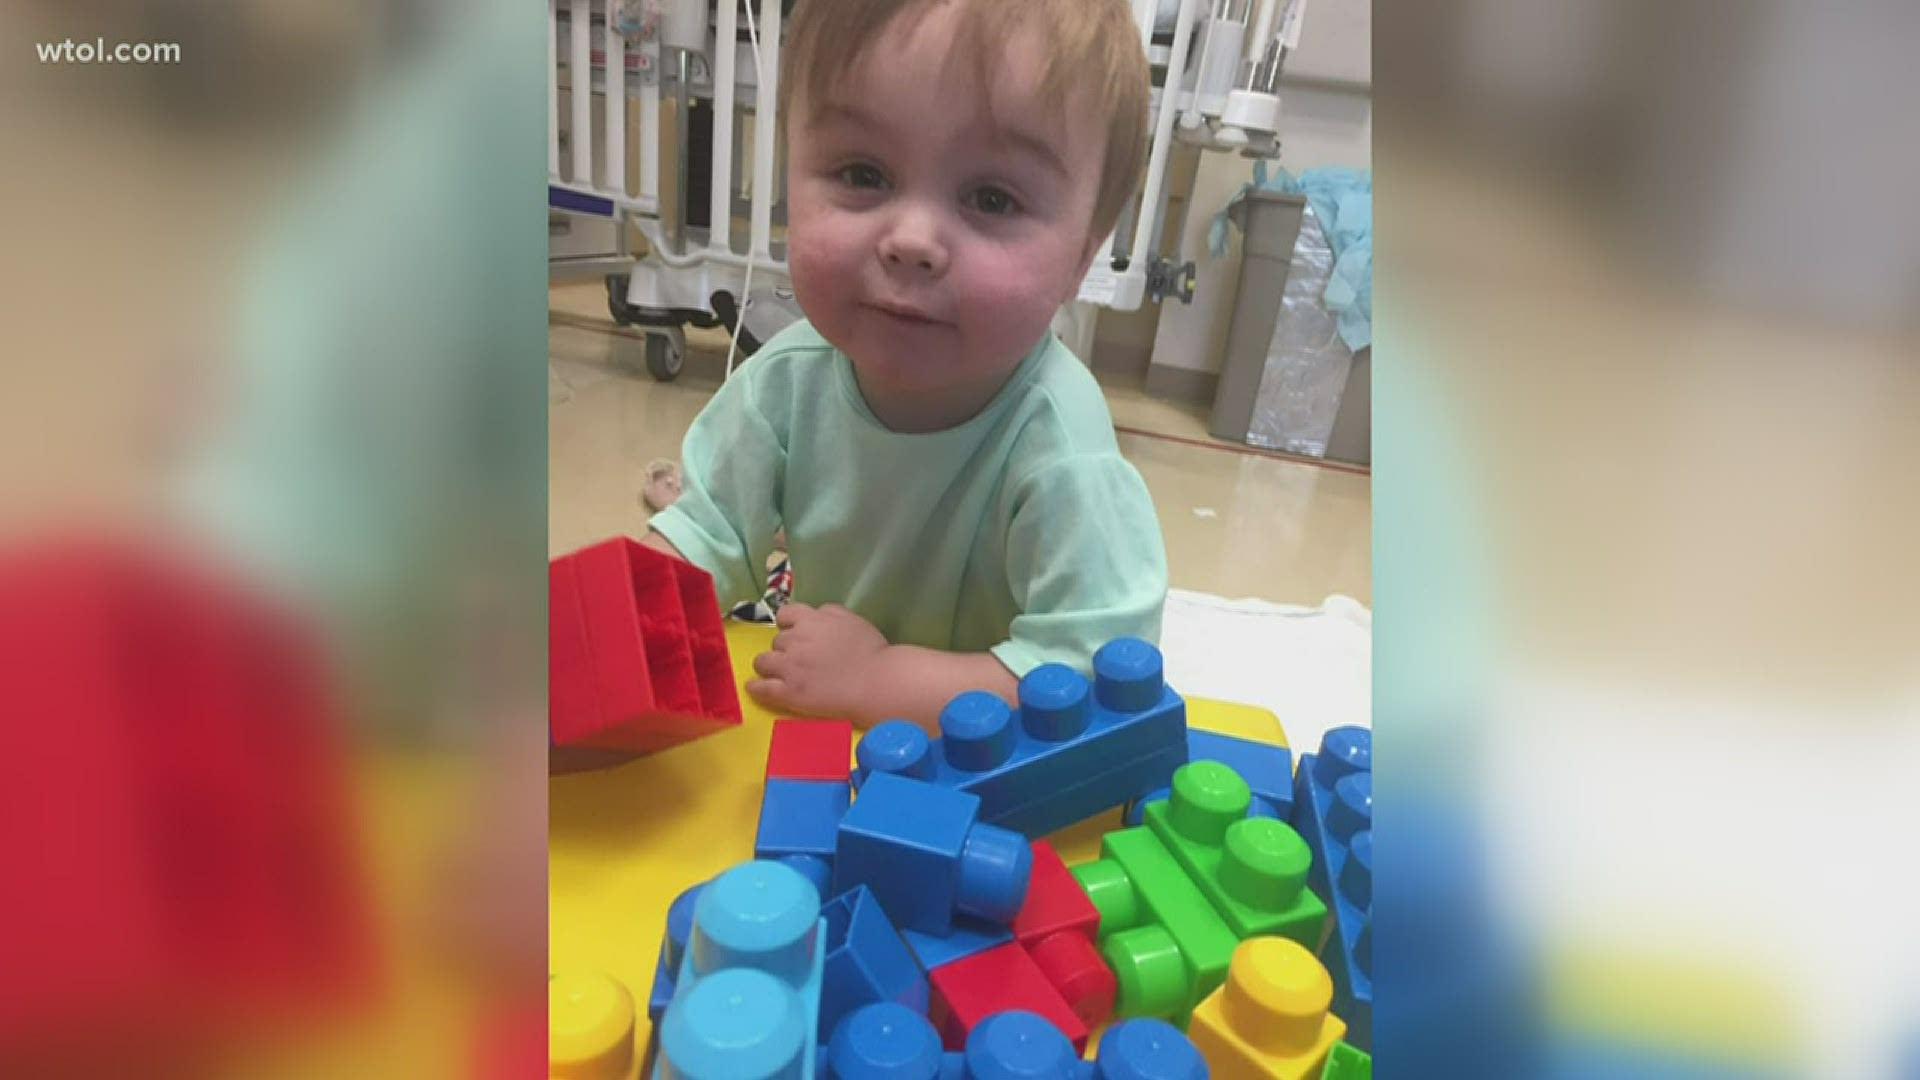 Oliver Case is 3 years old and has spent a lot of time in the hospital during his short life. Family says a new kidney would make all the difference.